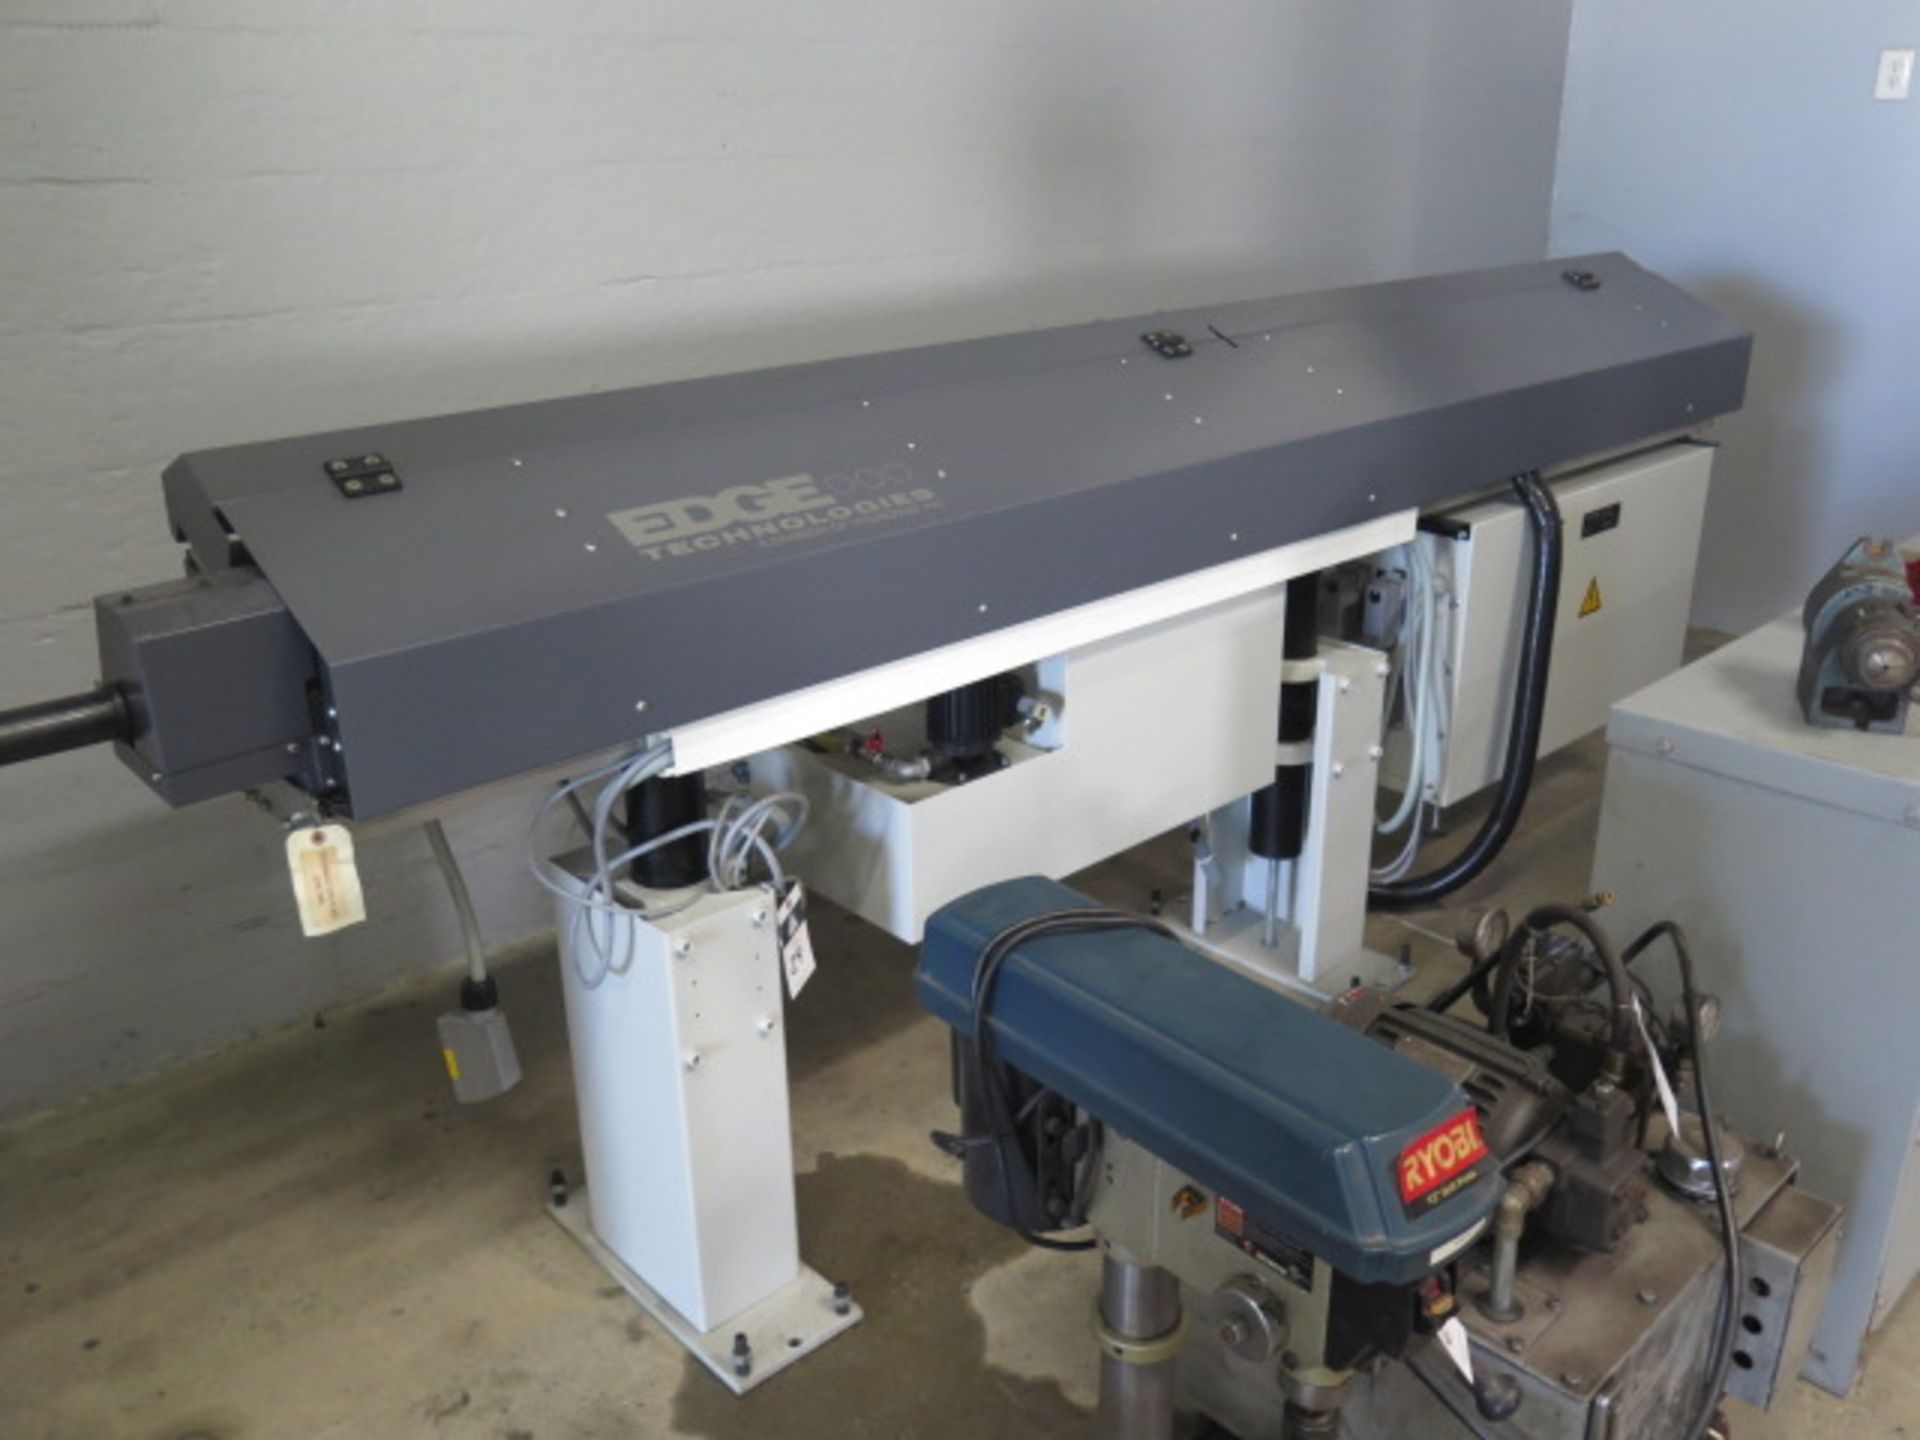 FMB / Edge Technologies "Minimag 18" Automatic Bar Loader / Feeder s/n 36-161505 SOLD AS IS